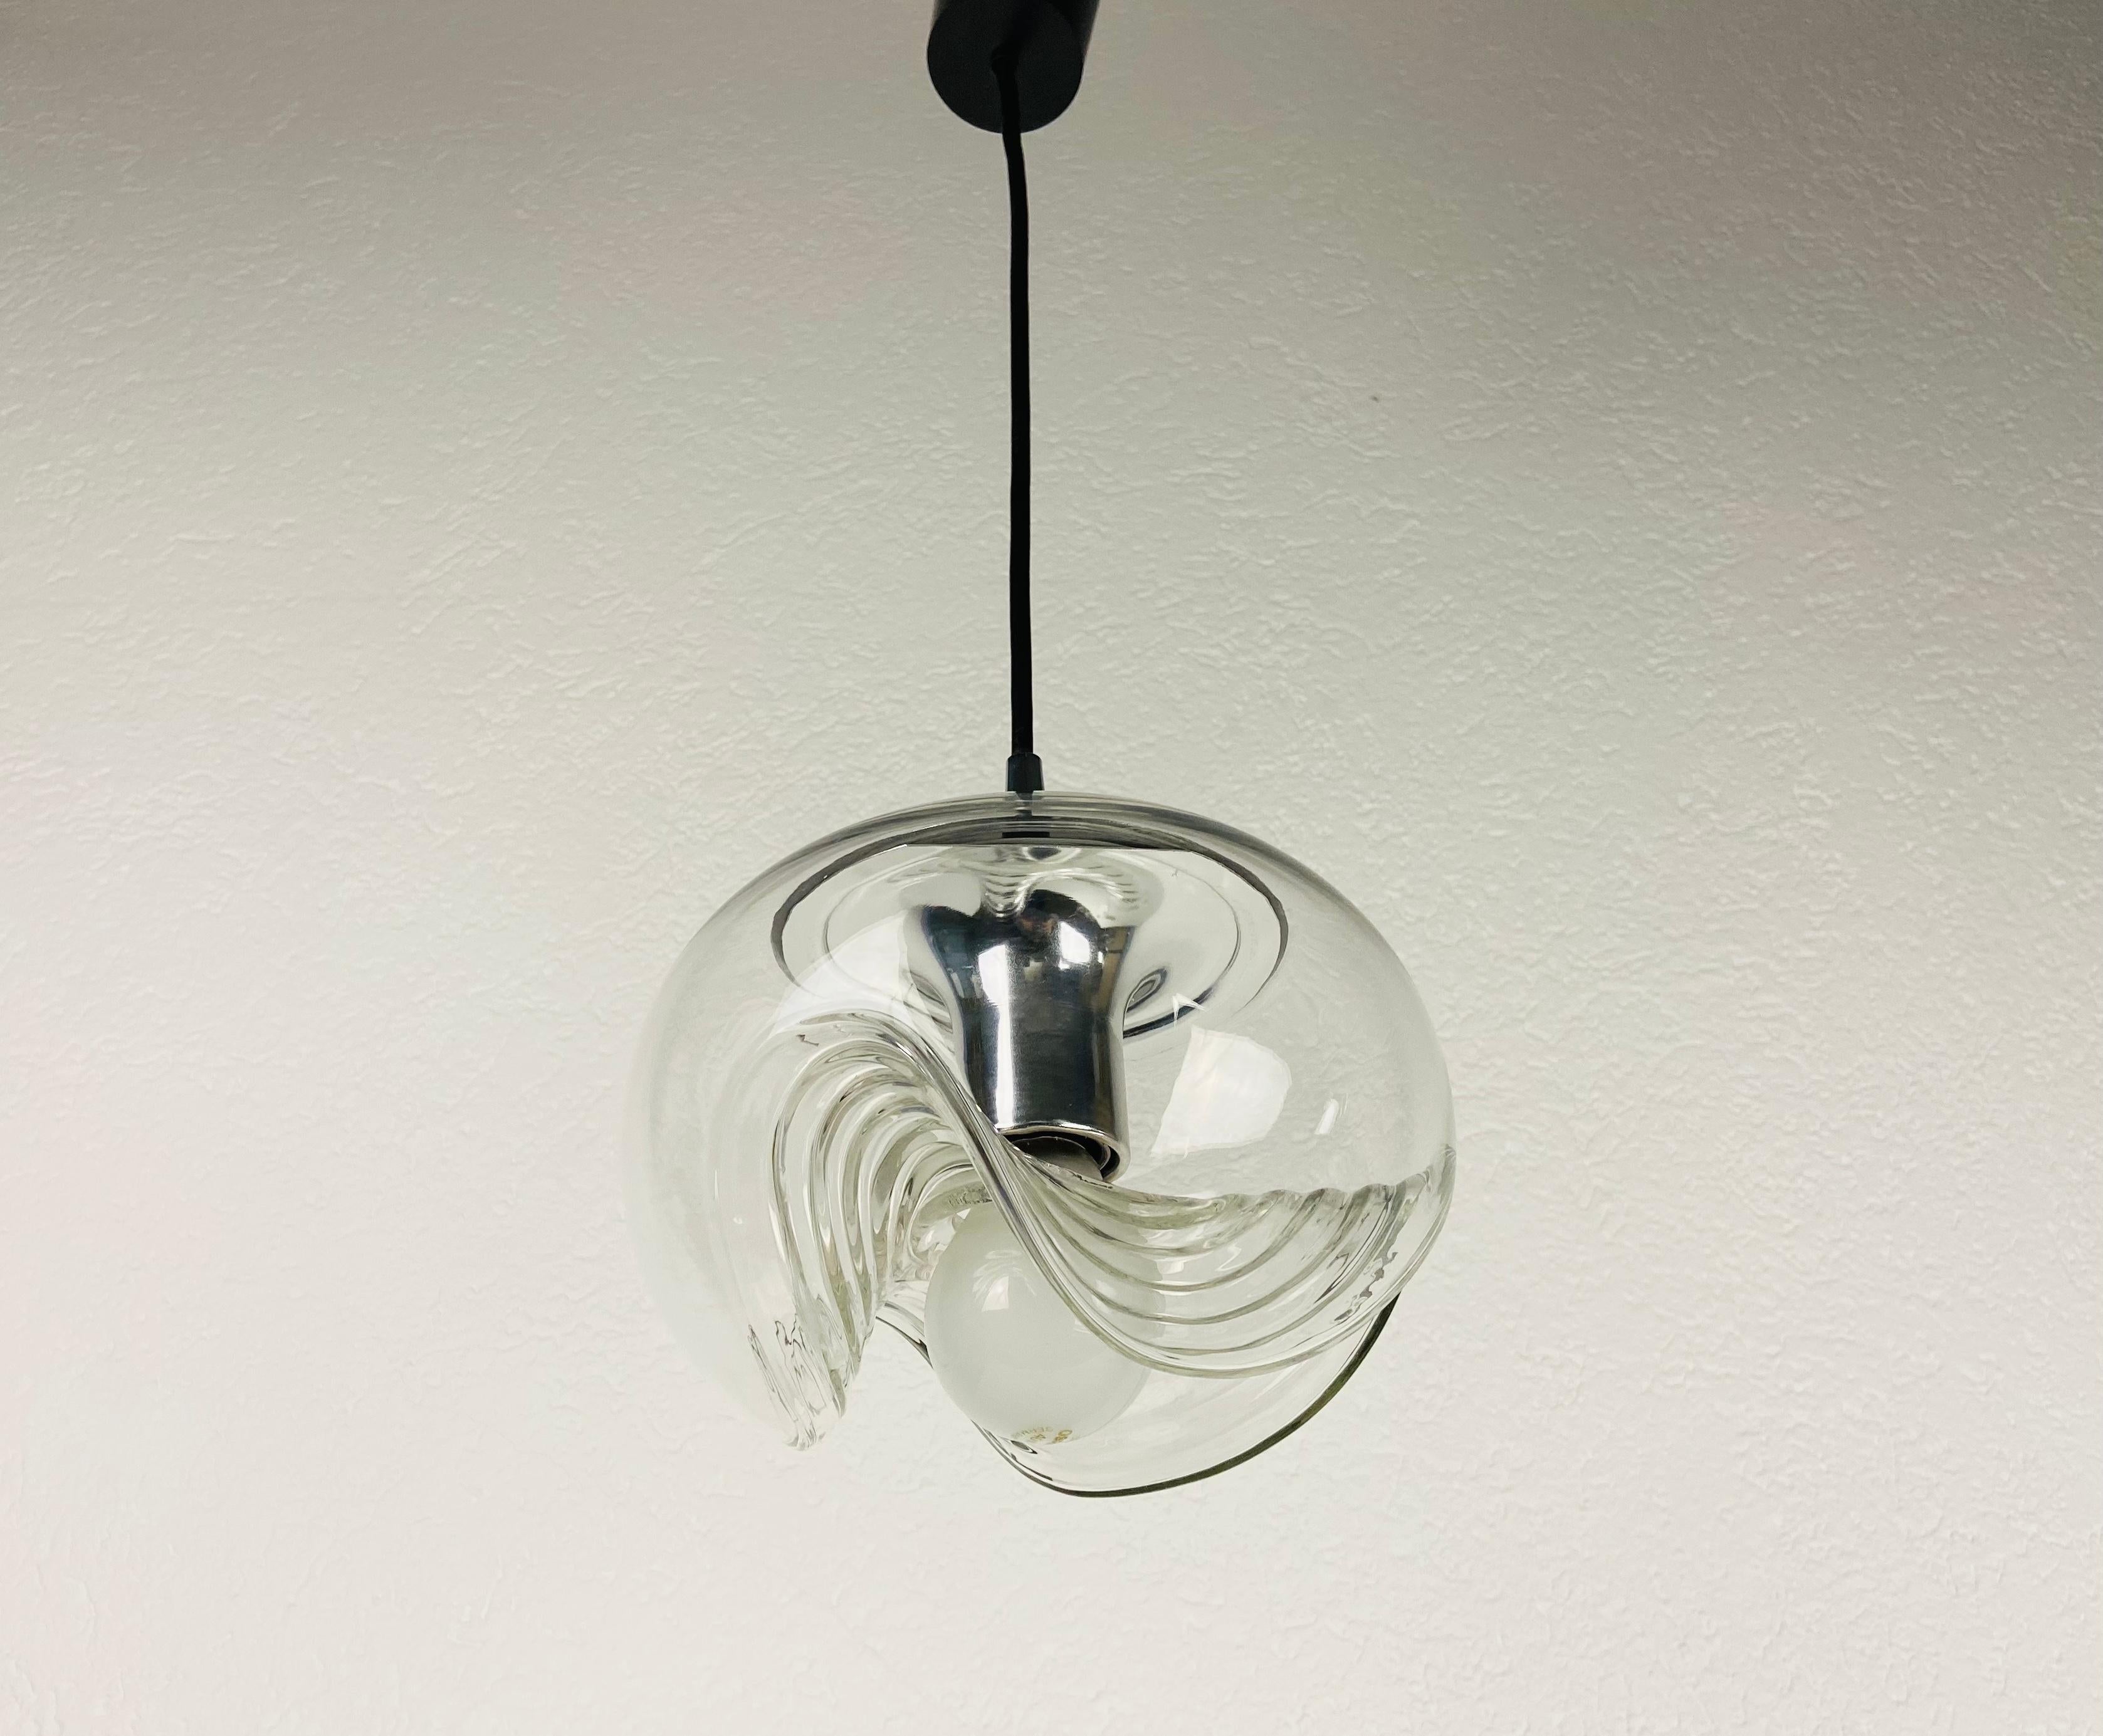 A round pendant lamp by Koch & Lowy for Peill and Putzler made in Germany in the 1960s. It is fascinating with its beautiful transparent glass. The lamp has a Space Age design.

The light requires one E27 light bulb. Very good vintage